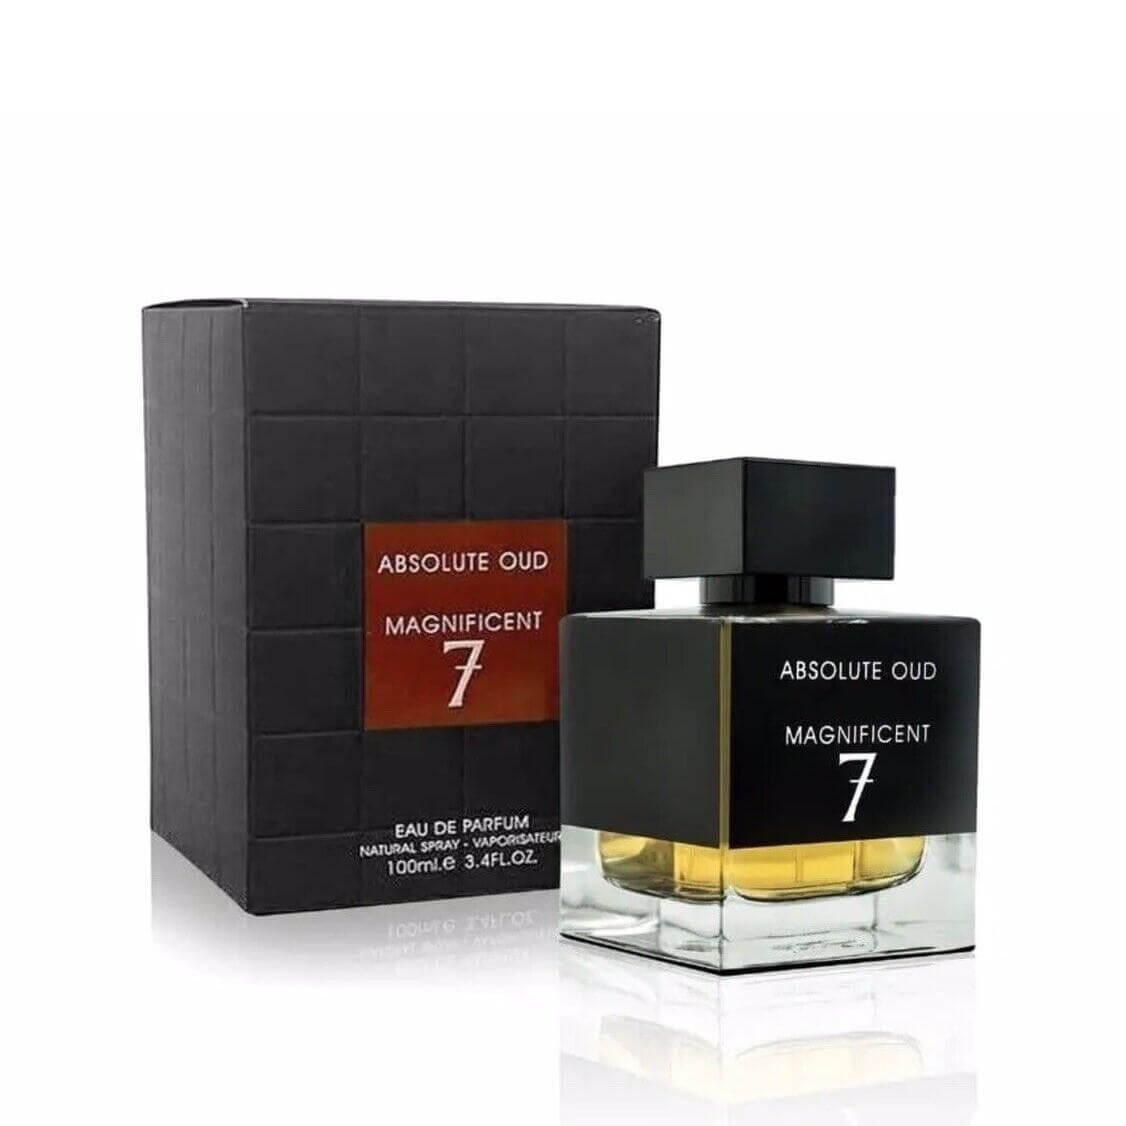 Absolute Oud Magnificent 7 Perfume / Eau De Parfum 100Ml By Fragrance World (Inspired By Ysl M7 Oud Absolu)